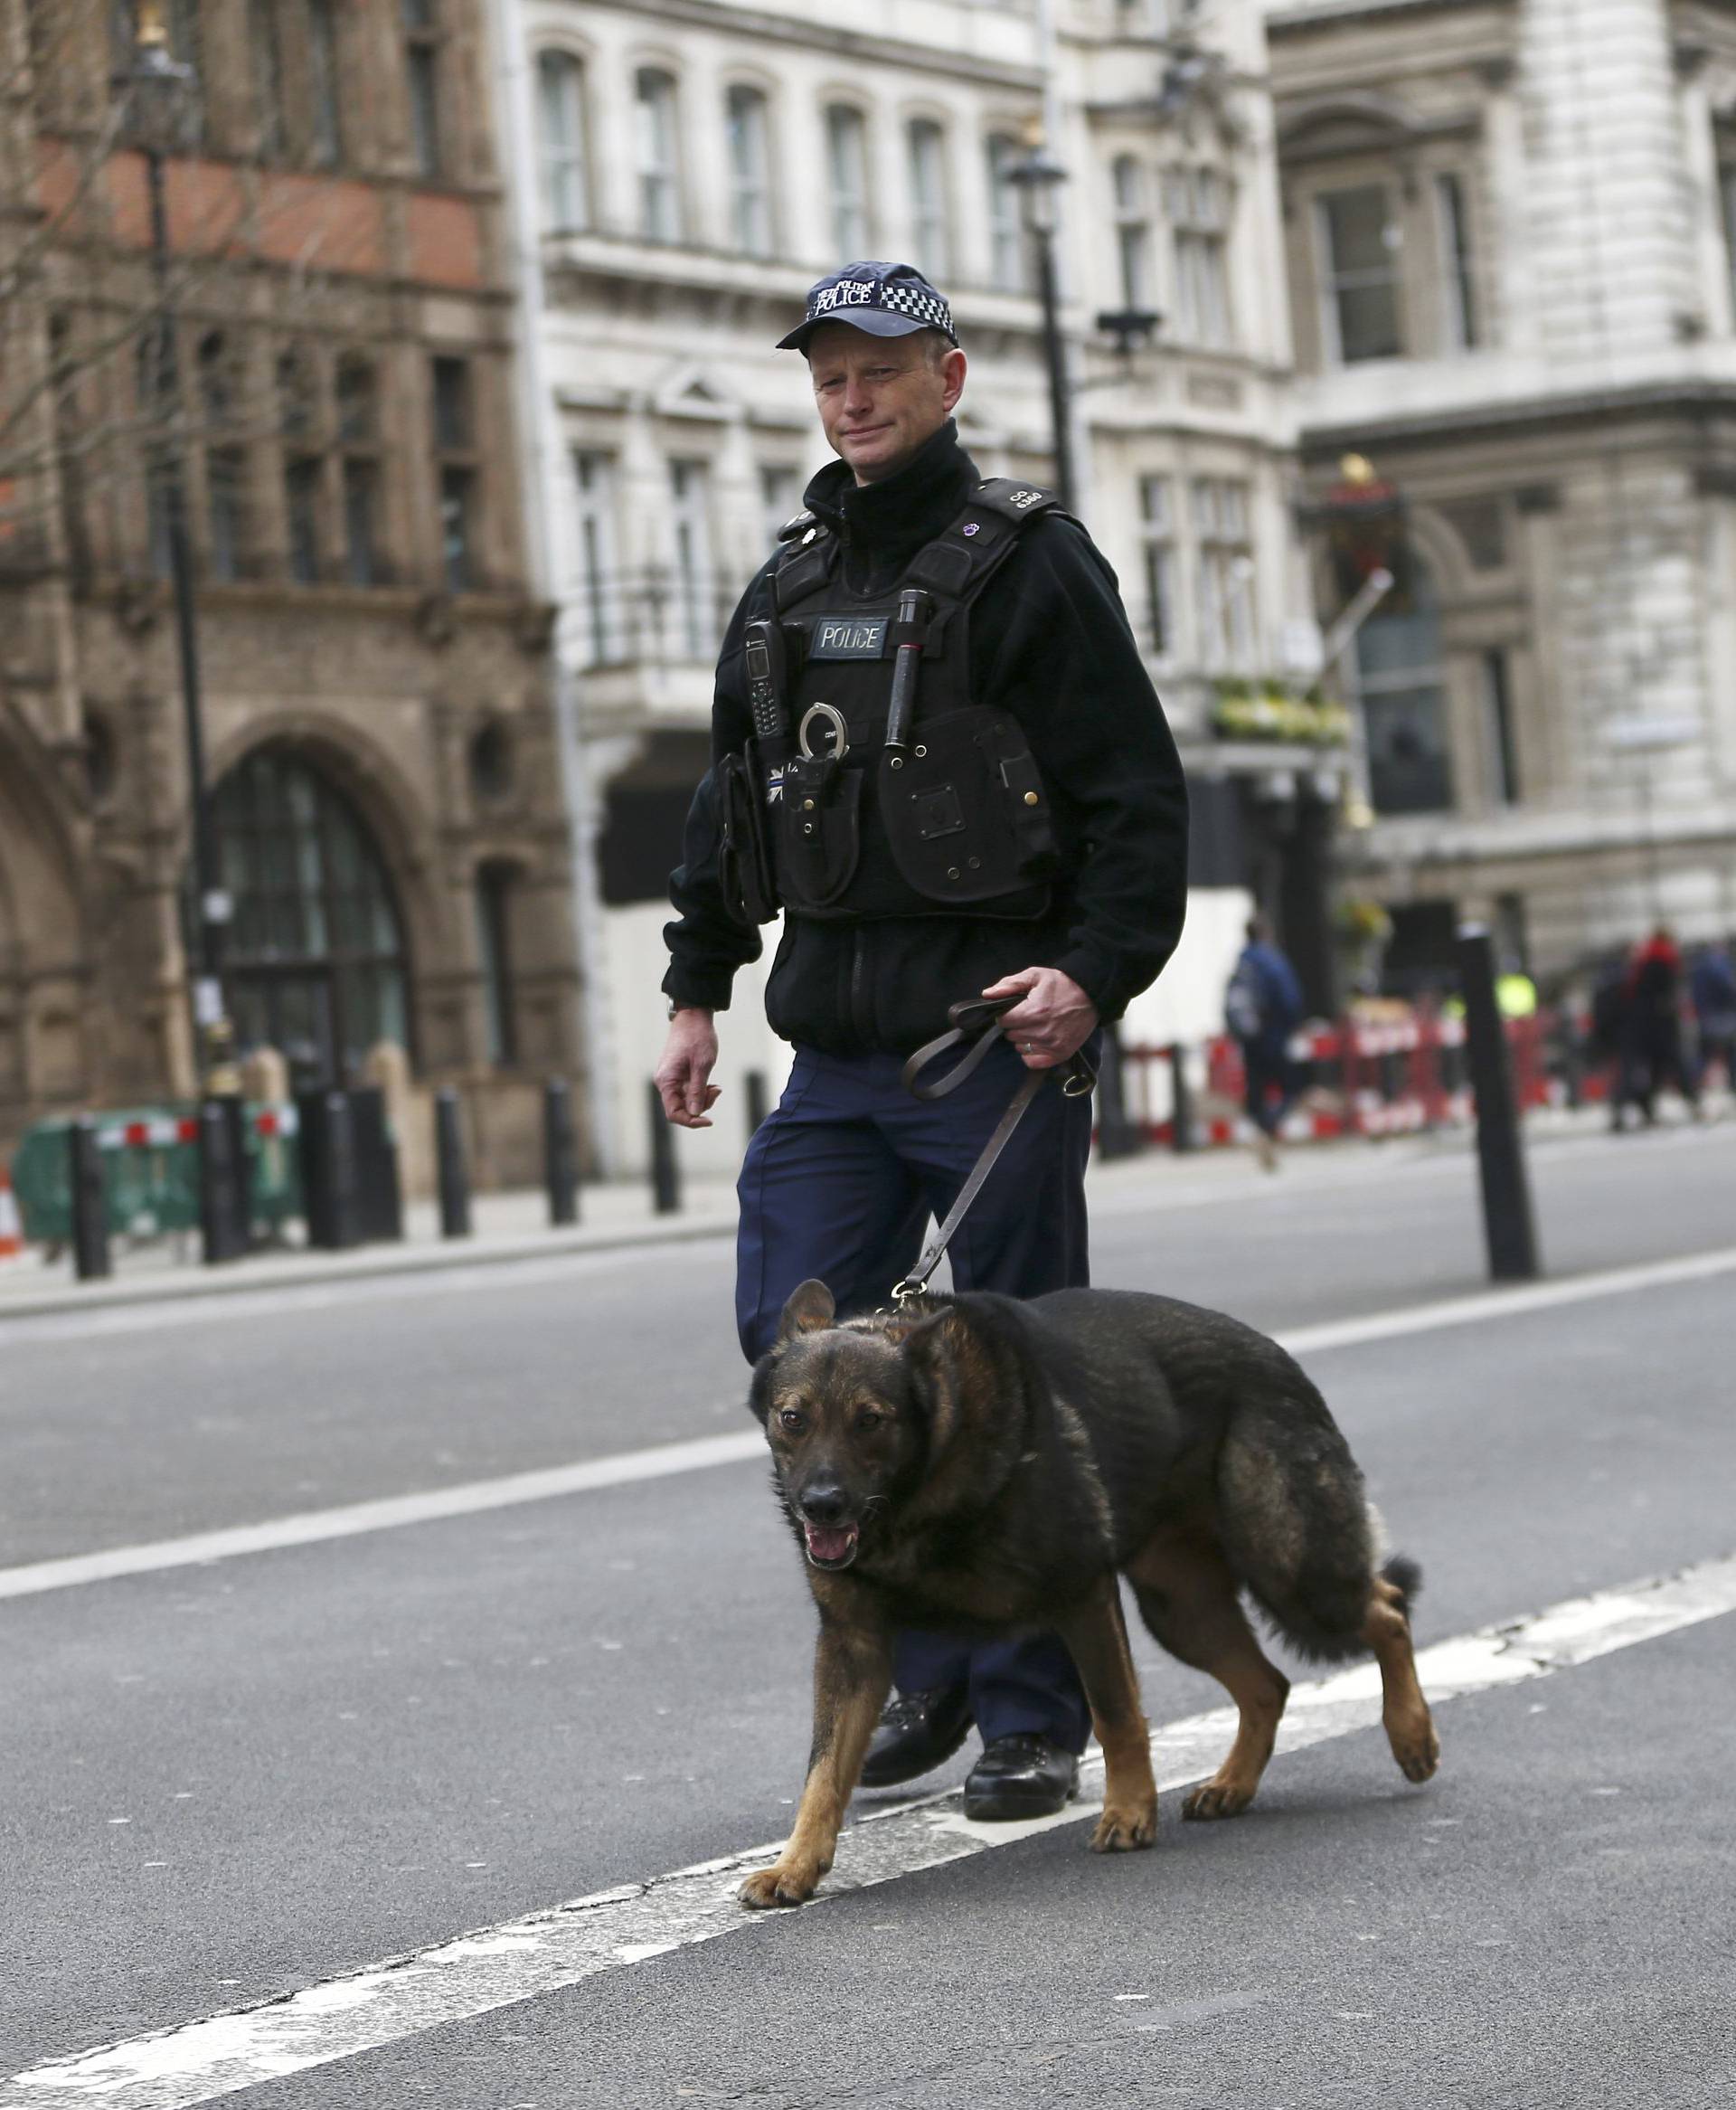 A police officer patrols Whitehall with a dog the morning after an attack in London